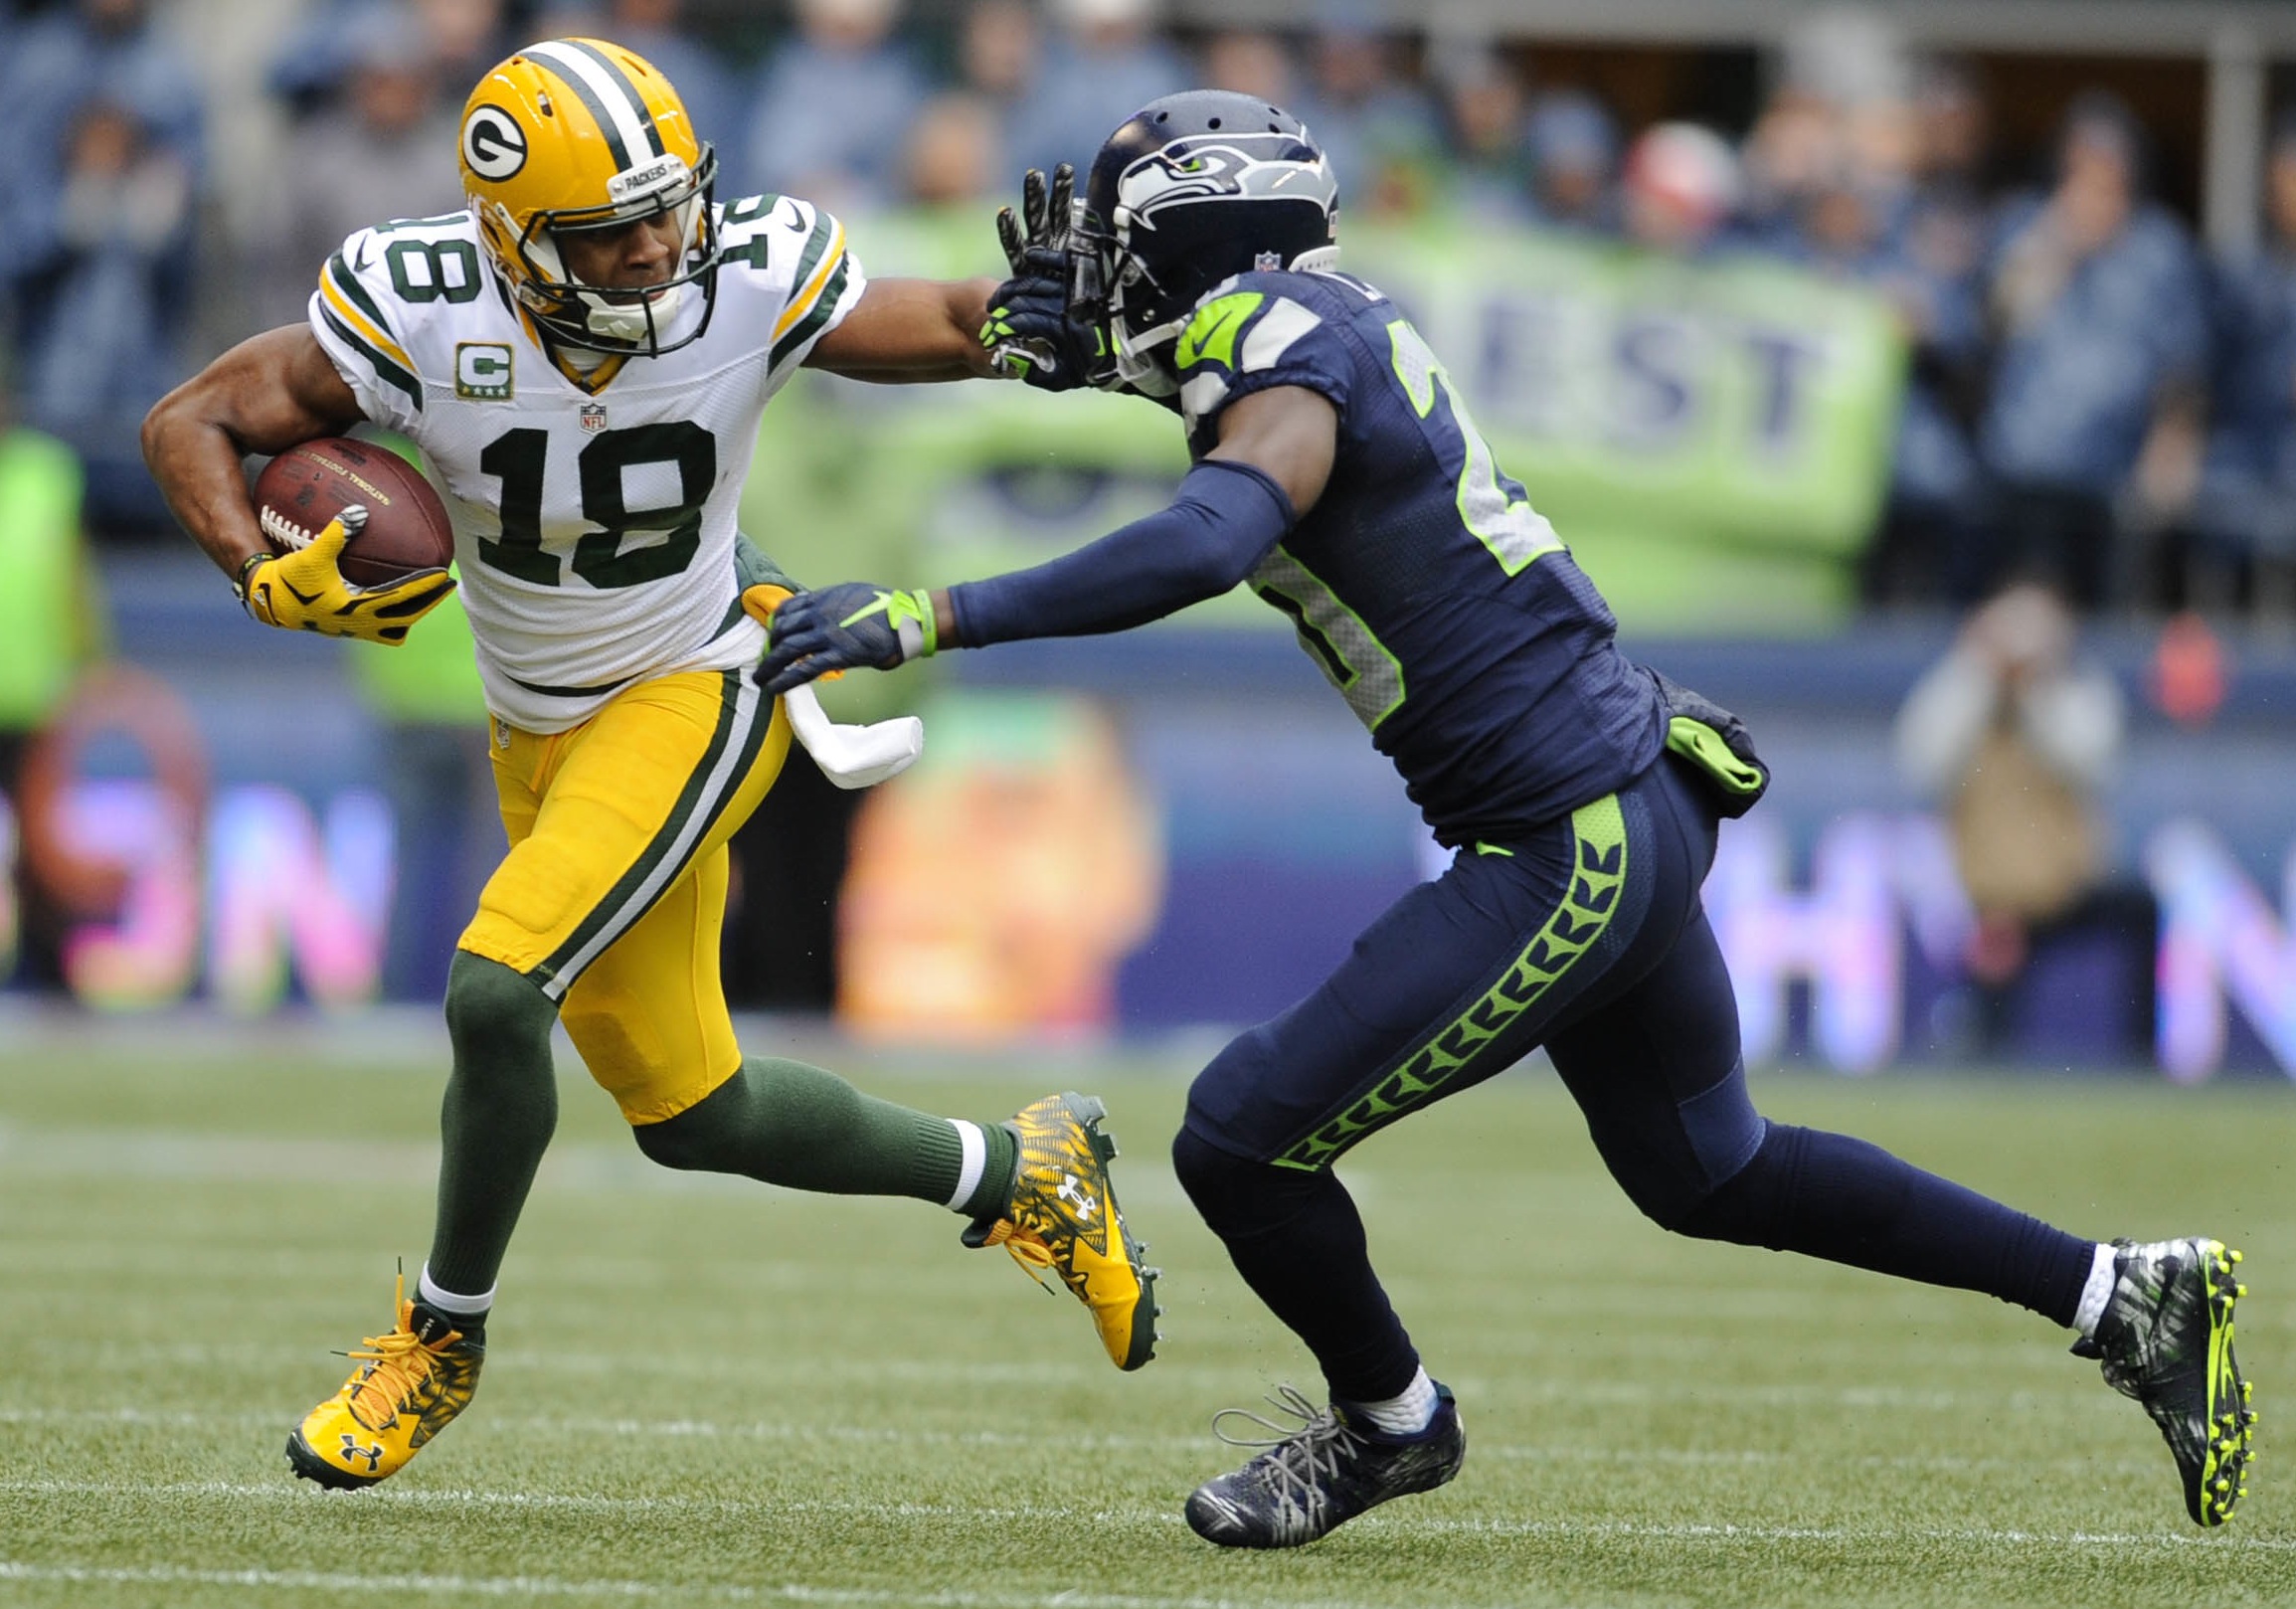 Green Bay Packers wide receiver Randall Cobb and Seattle Seahawks cornerback Jeremy Lane—Steven Bisig, USA TODAY Sports.